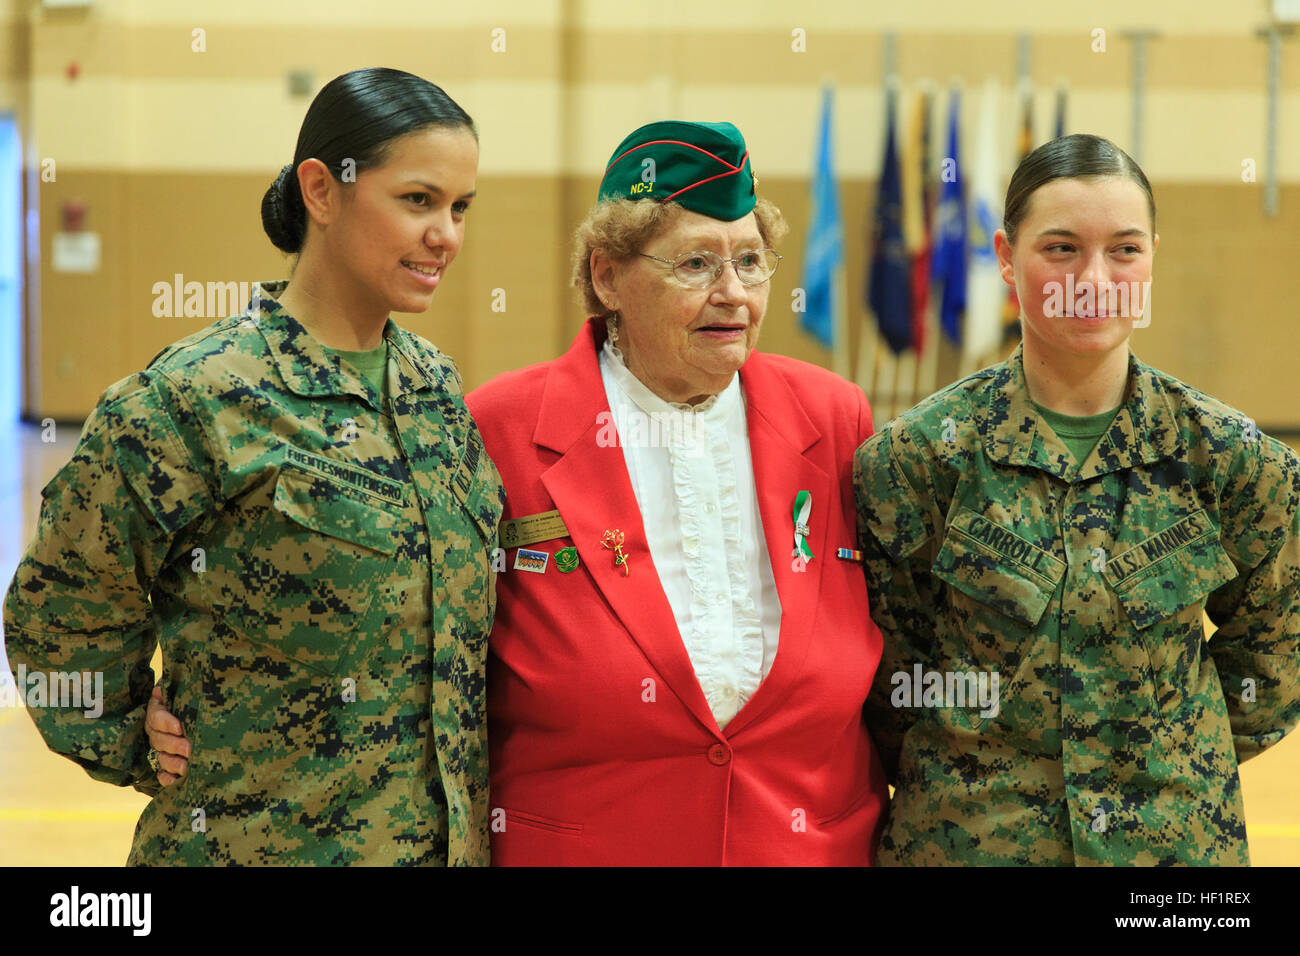 Pfc. Cristina Fuentes Montenegro, 25, one of the first three female Marine graduates from the School of Infantry-East's Infantry Training Battalion course, and native of Coral Springs, Florida, left, and Pfc. Julia Carroll, 18, one of the first three female Marine graduates from the School of Infantry-East's Infantry Training Battalion course, and native of Idaho Falls, Idaho, far right, stand with Shirley M. John from the North Carolina Tarheel Chapter of the Women Marines Association following the graduation ceremony of Delta Company, Infantry Training Battalion, School of Infantry-East at C Stock Photo